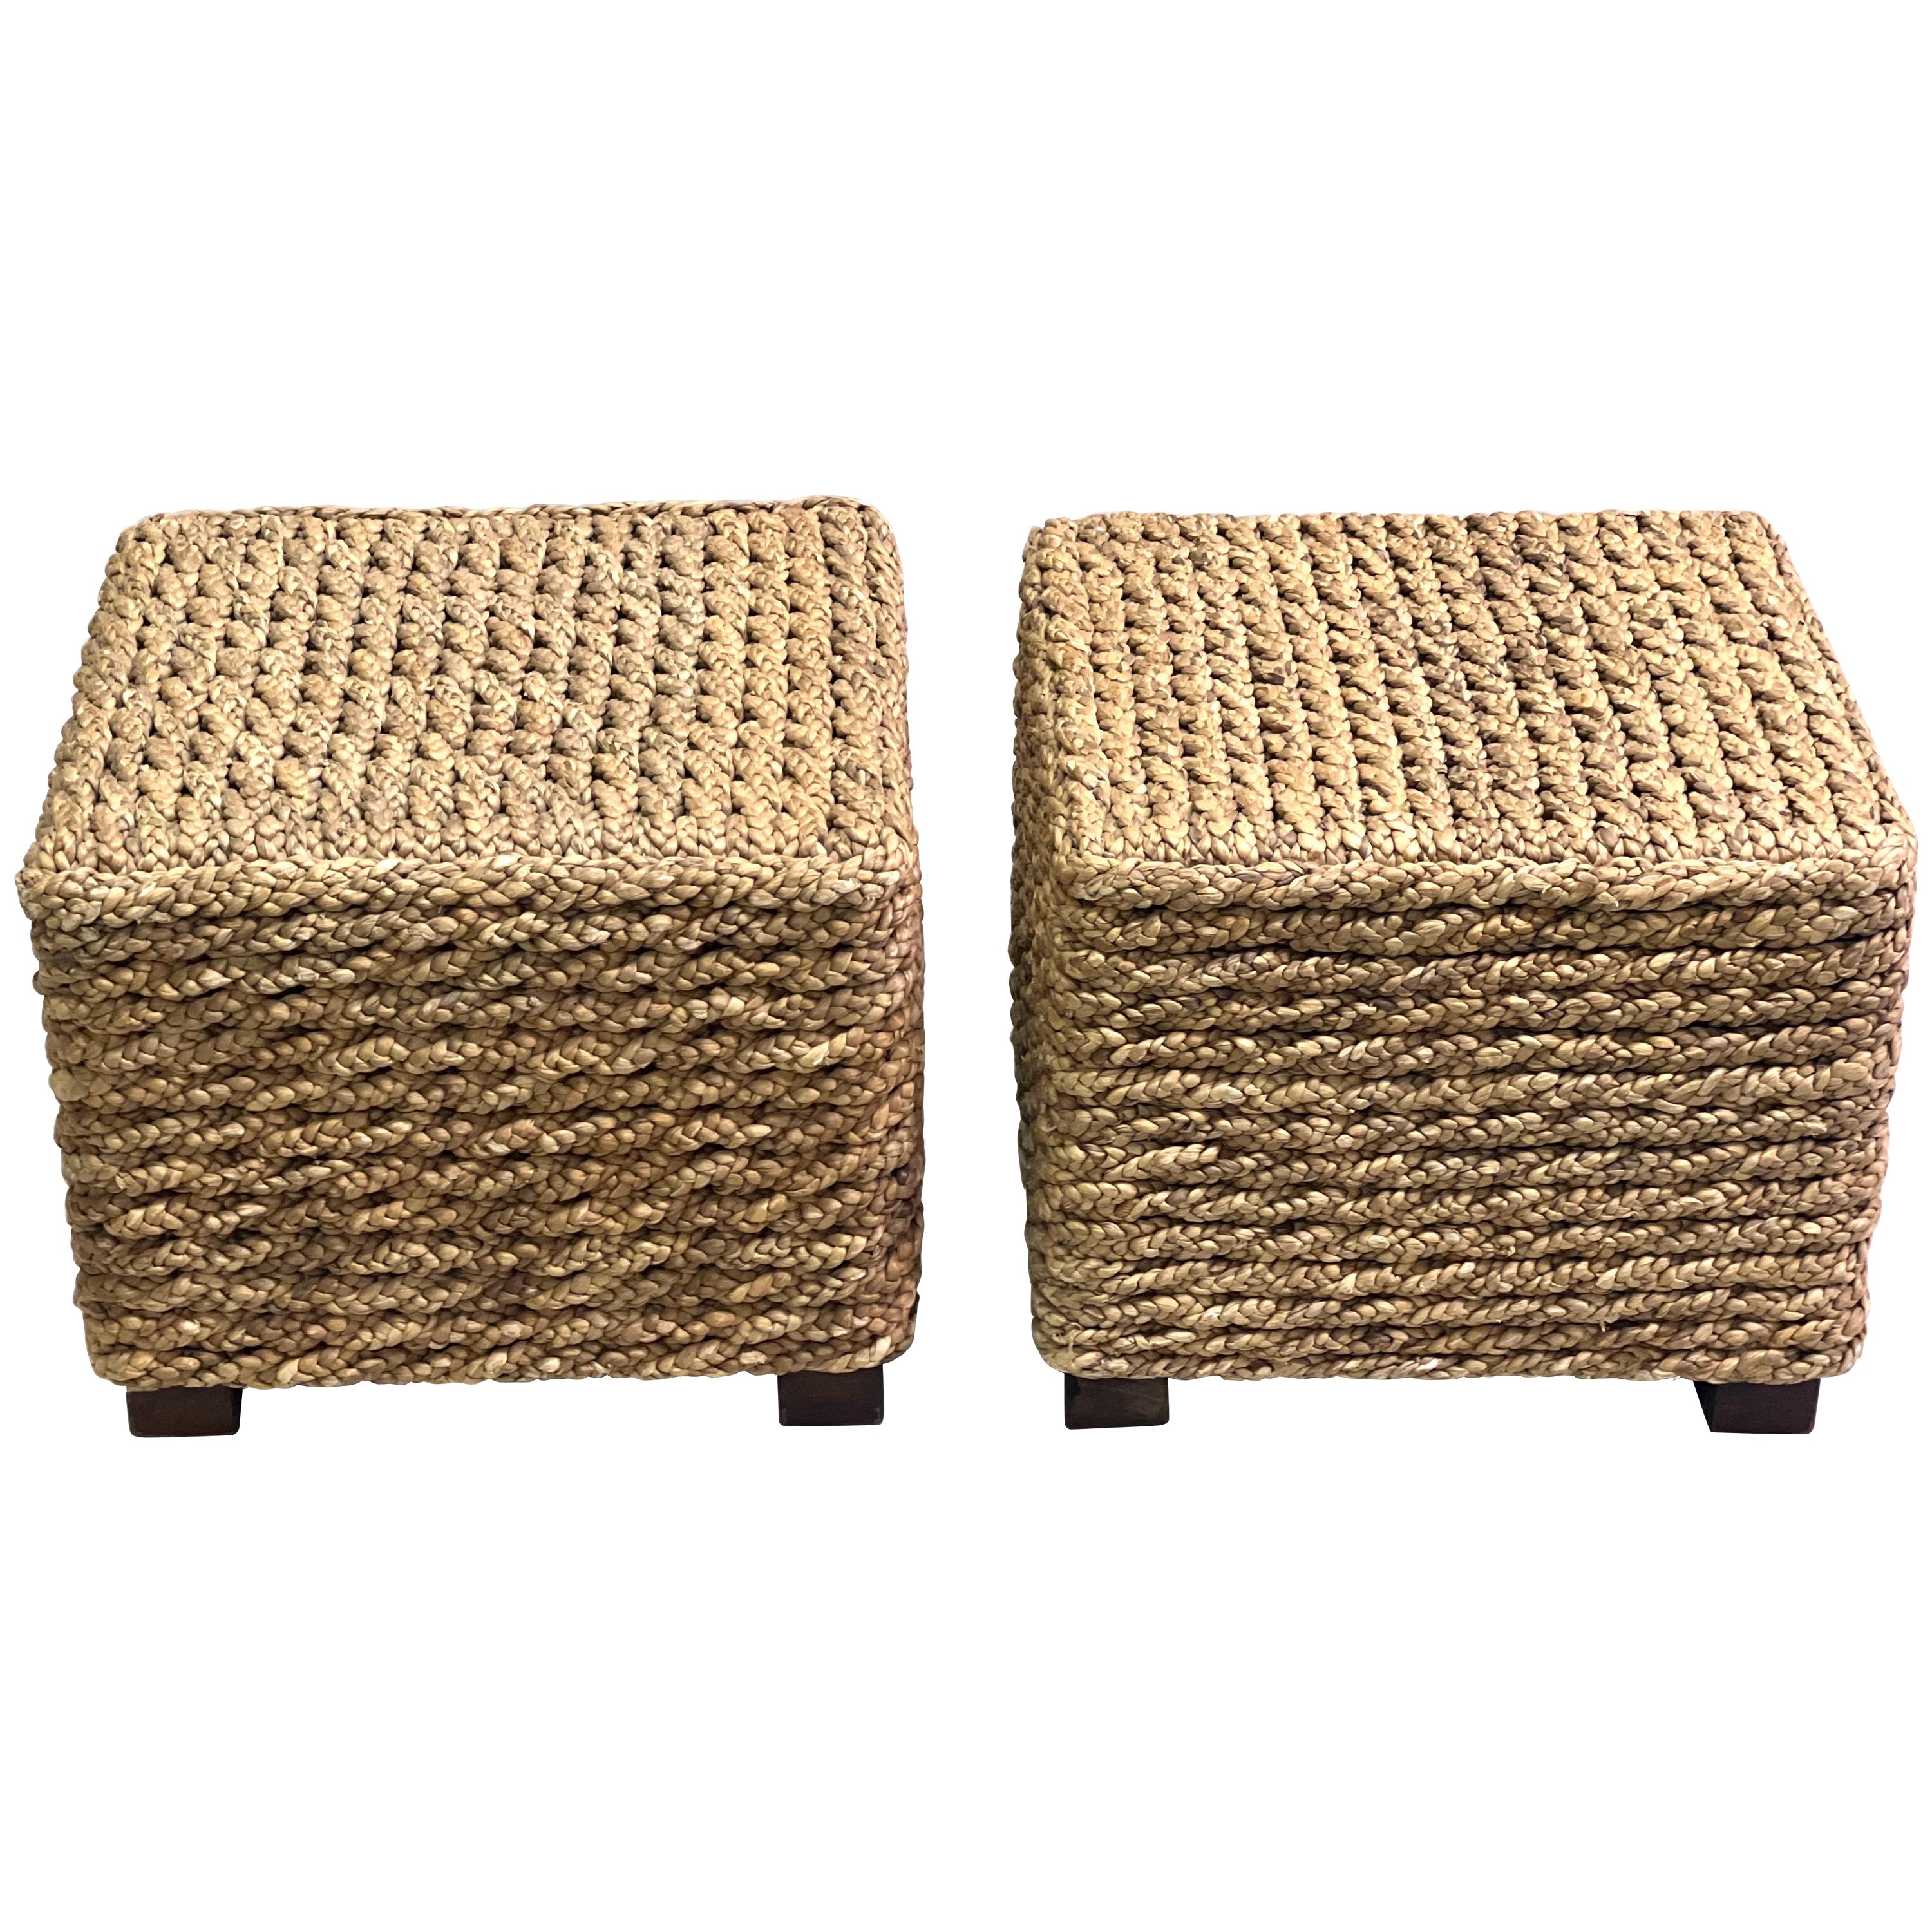 1 French Mid-Century Rope Stool / Bench by Adrien Audoux & Frida Minet For Sale 6